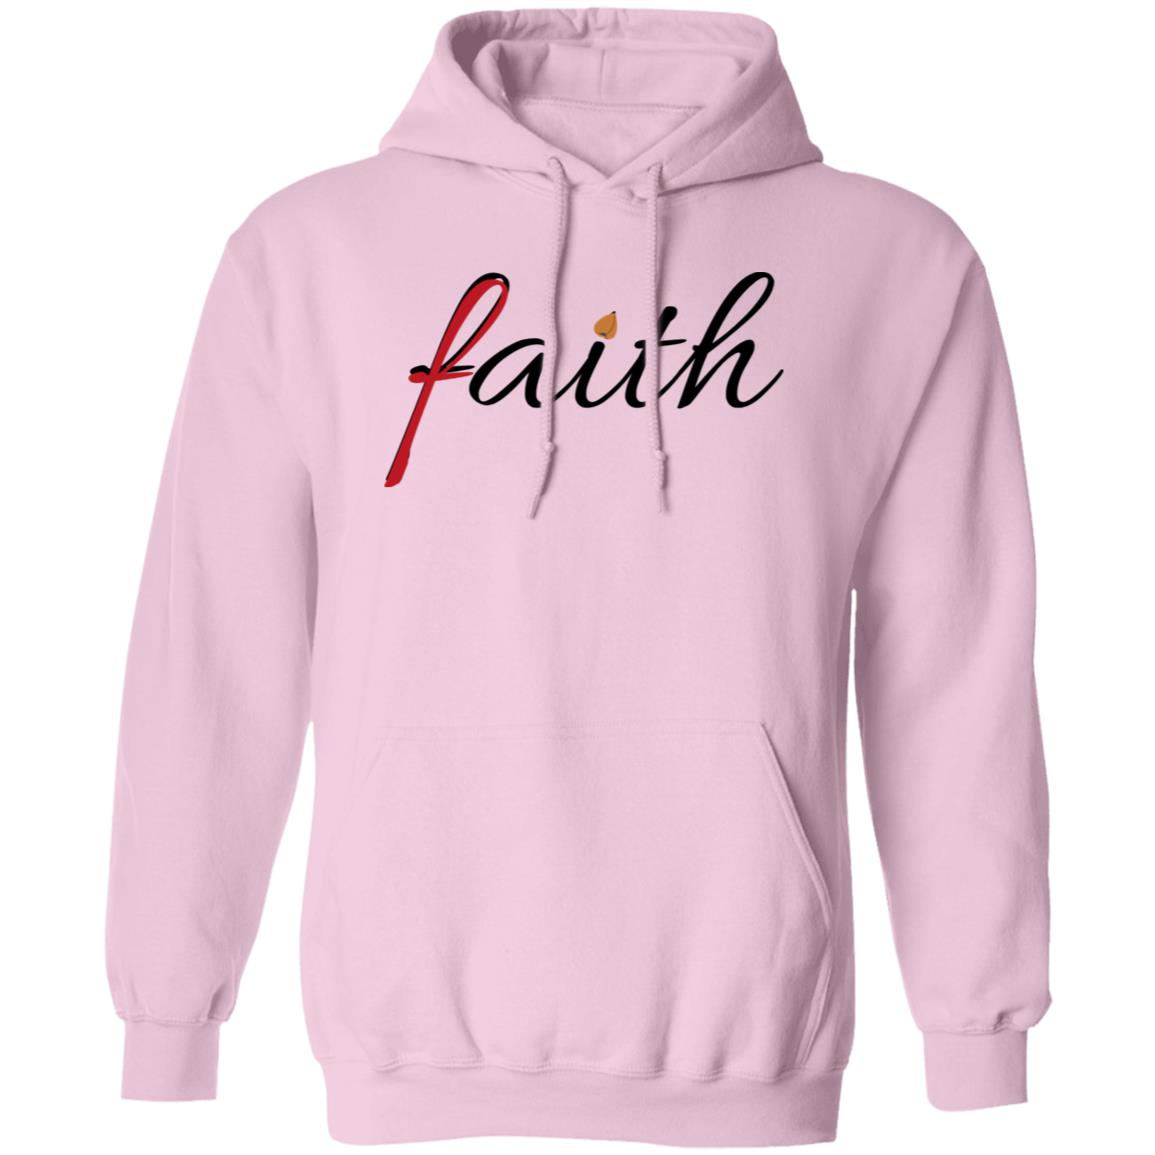 Mustard Seed of Faith Pullover Hoodie